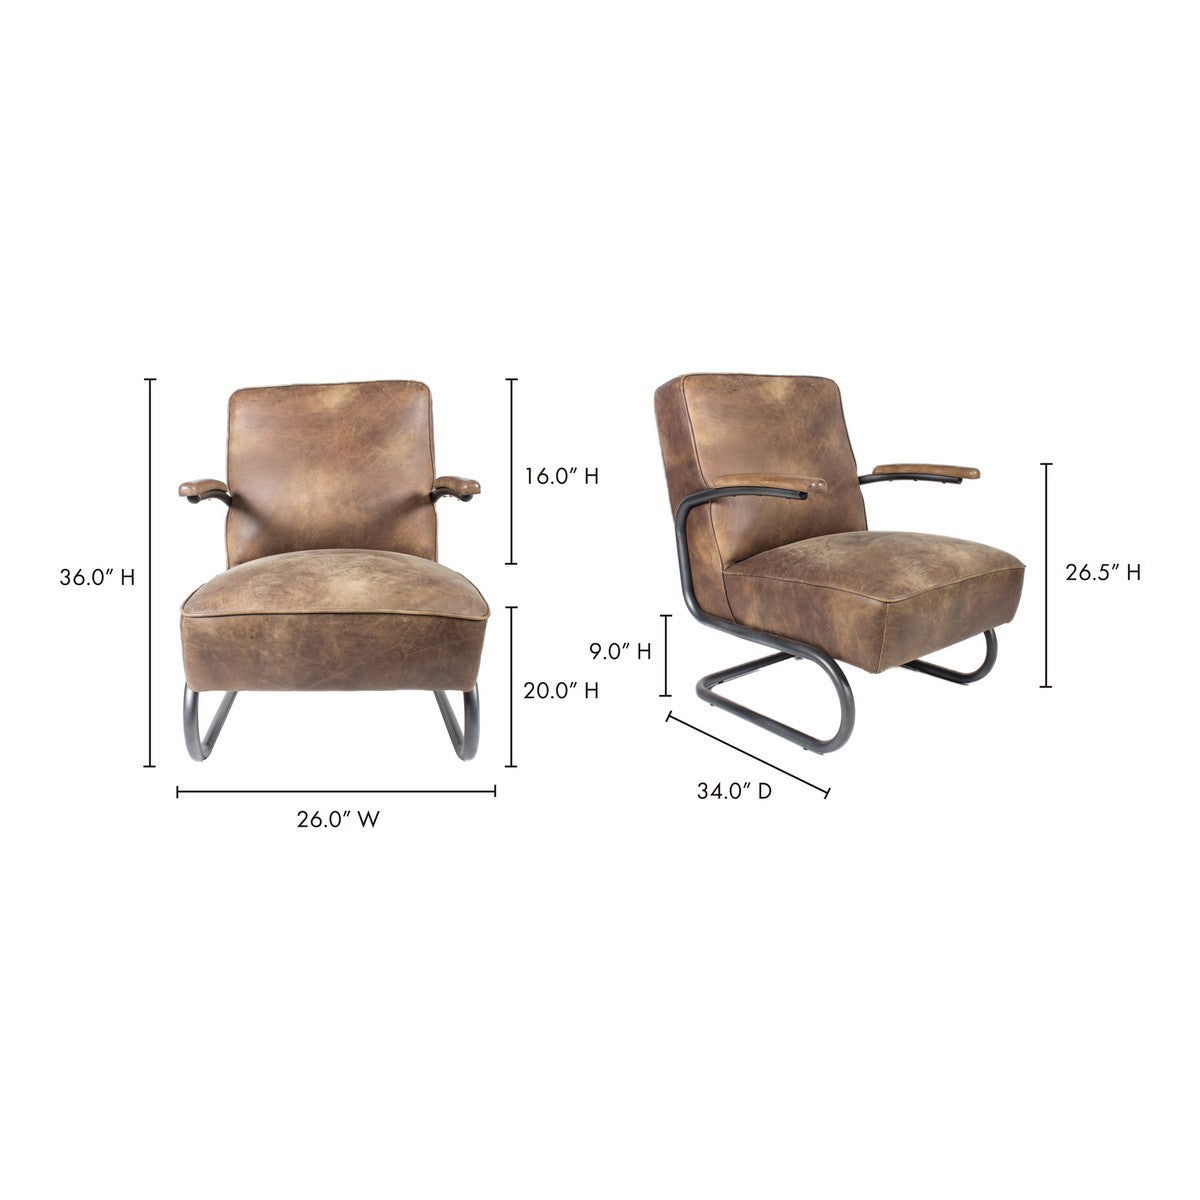 Moe's Home Collection Perth Club Chair Light Brown - PK-1022-03